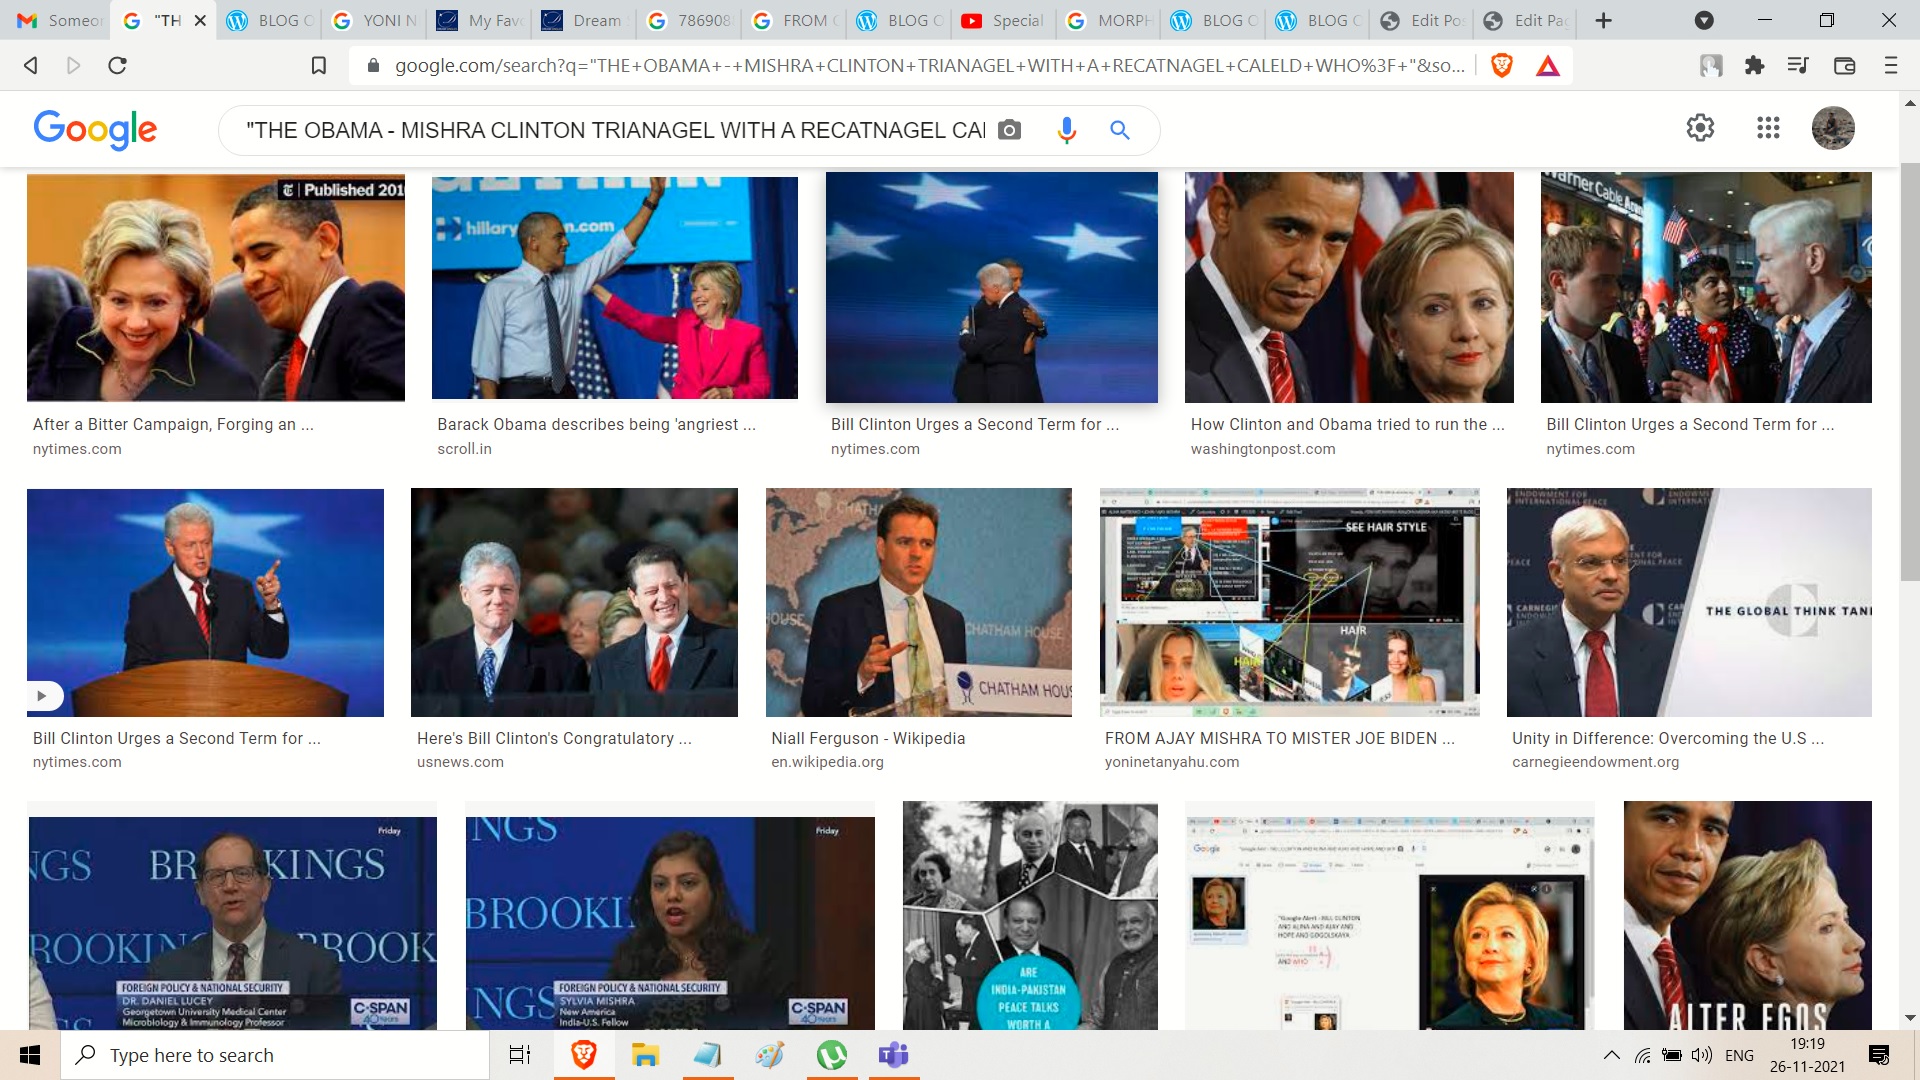 THE OBAMA - MISHRA CLINTON TRIANAGEL WITH A RECATNAGEL CALELD WHO